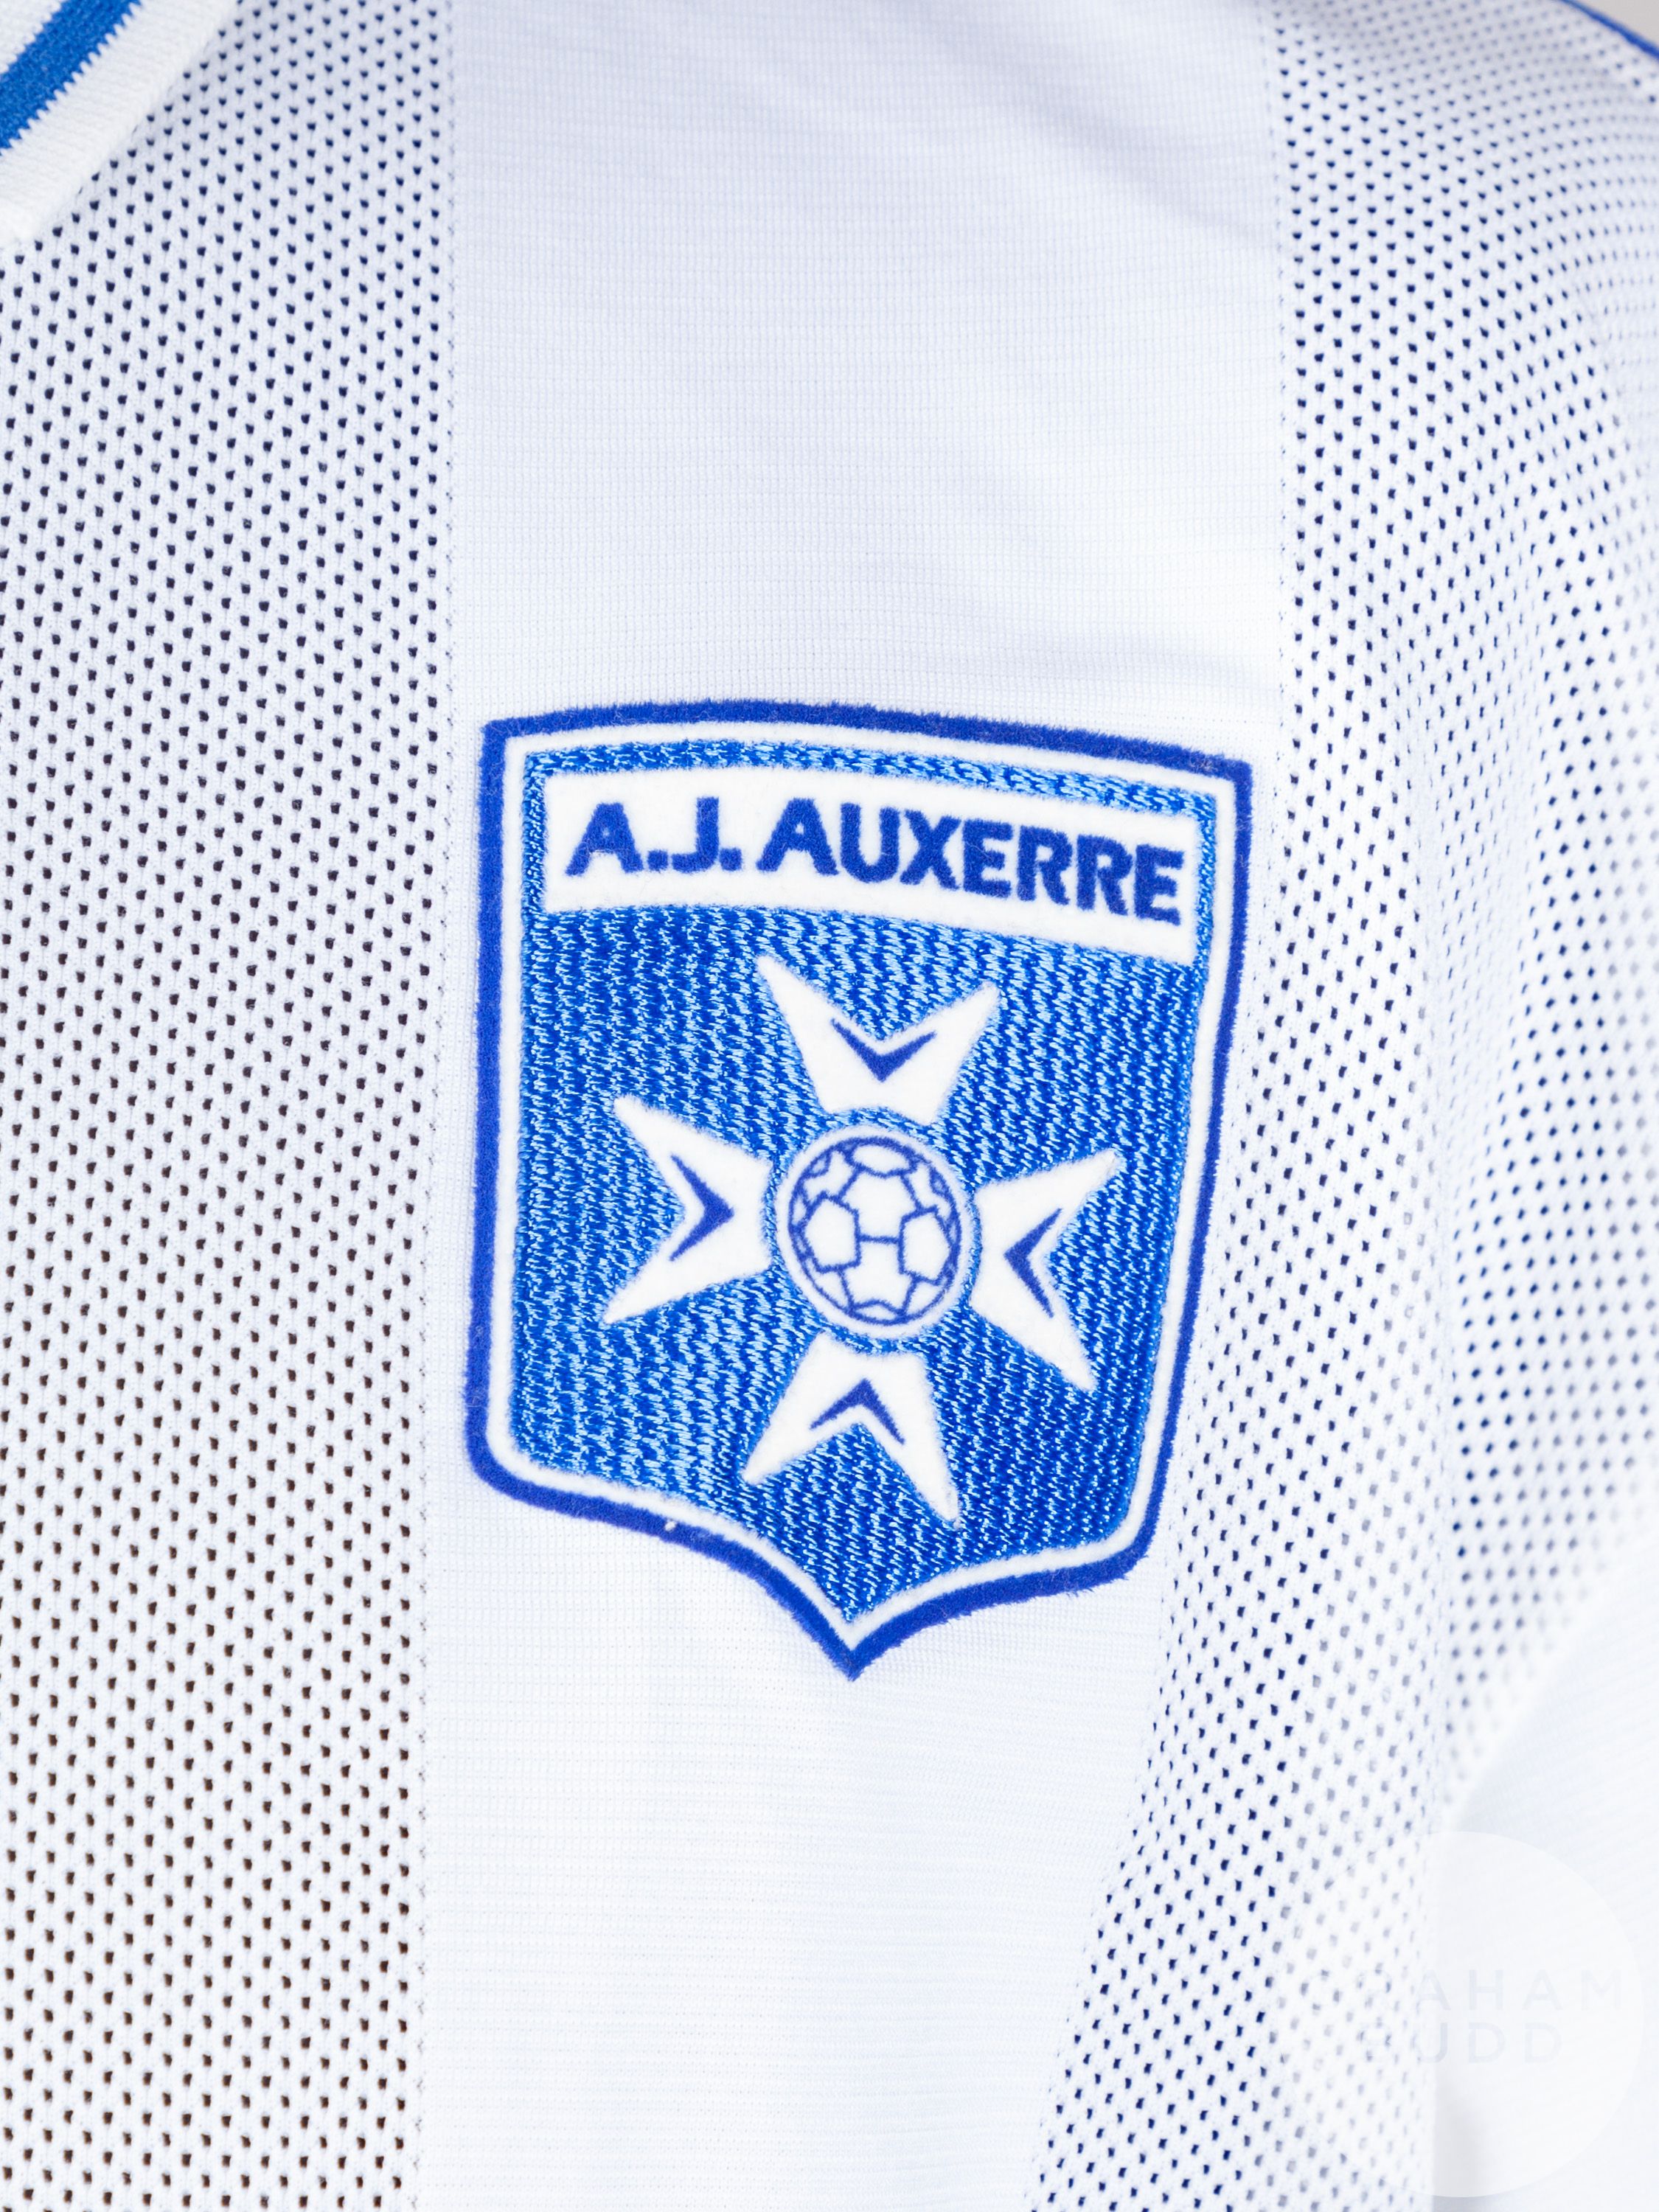 Lilian Laslandes white and blue No.9 Auxerre Champions League long-sleeved shirt - Image 3 of 5